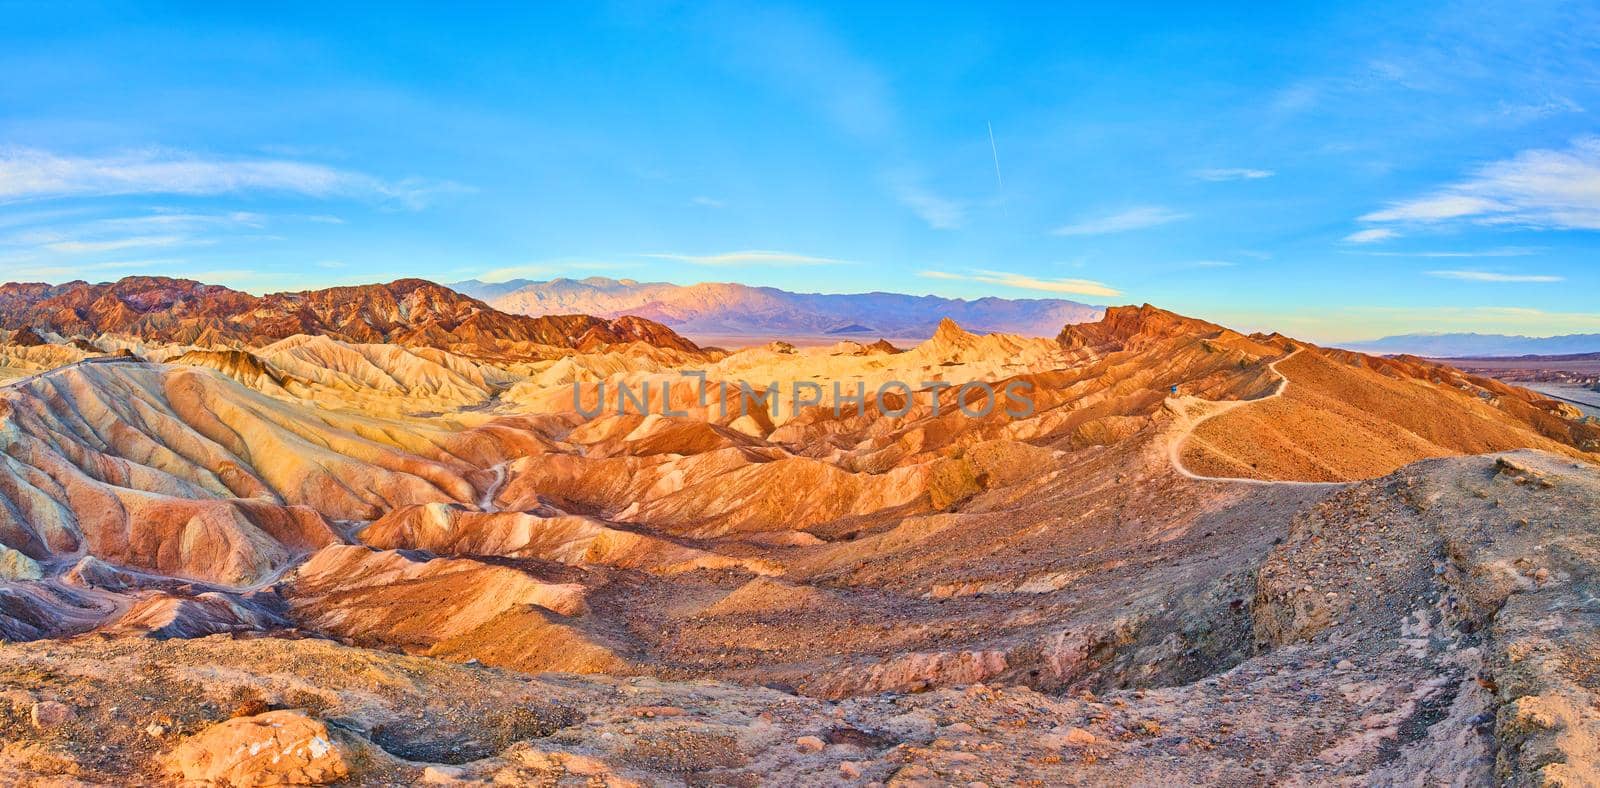 Mountains featuring waves of sediment colors and hiking path through the peaks in Death Valley by njproductions